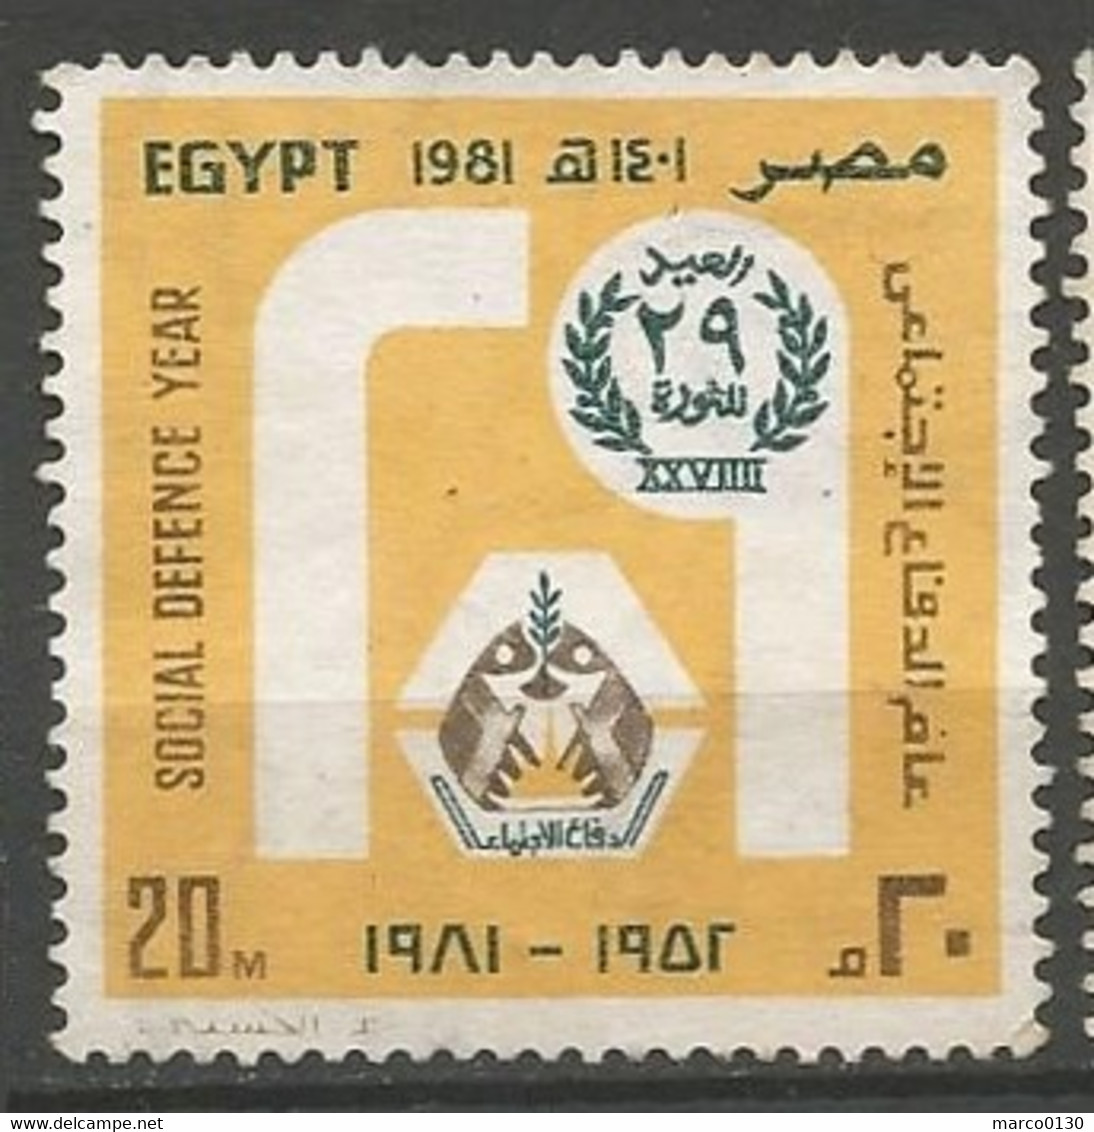 EGYPTE  N° 1146 OBLITERE - Used Stamps